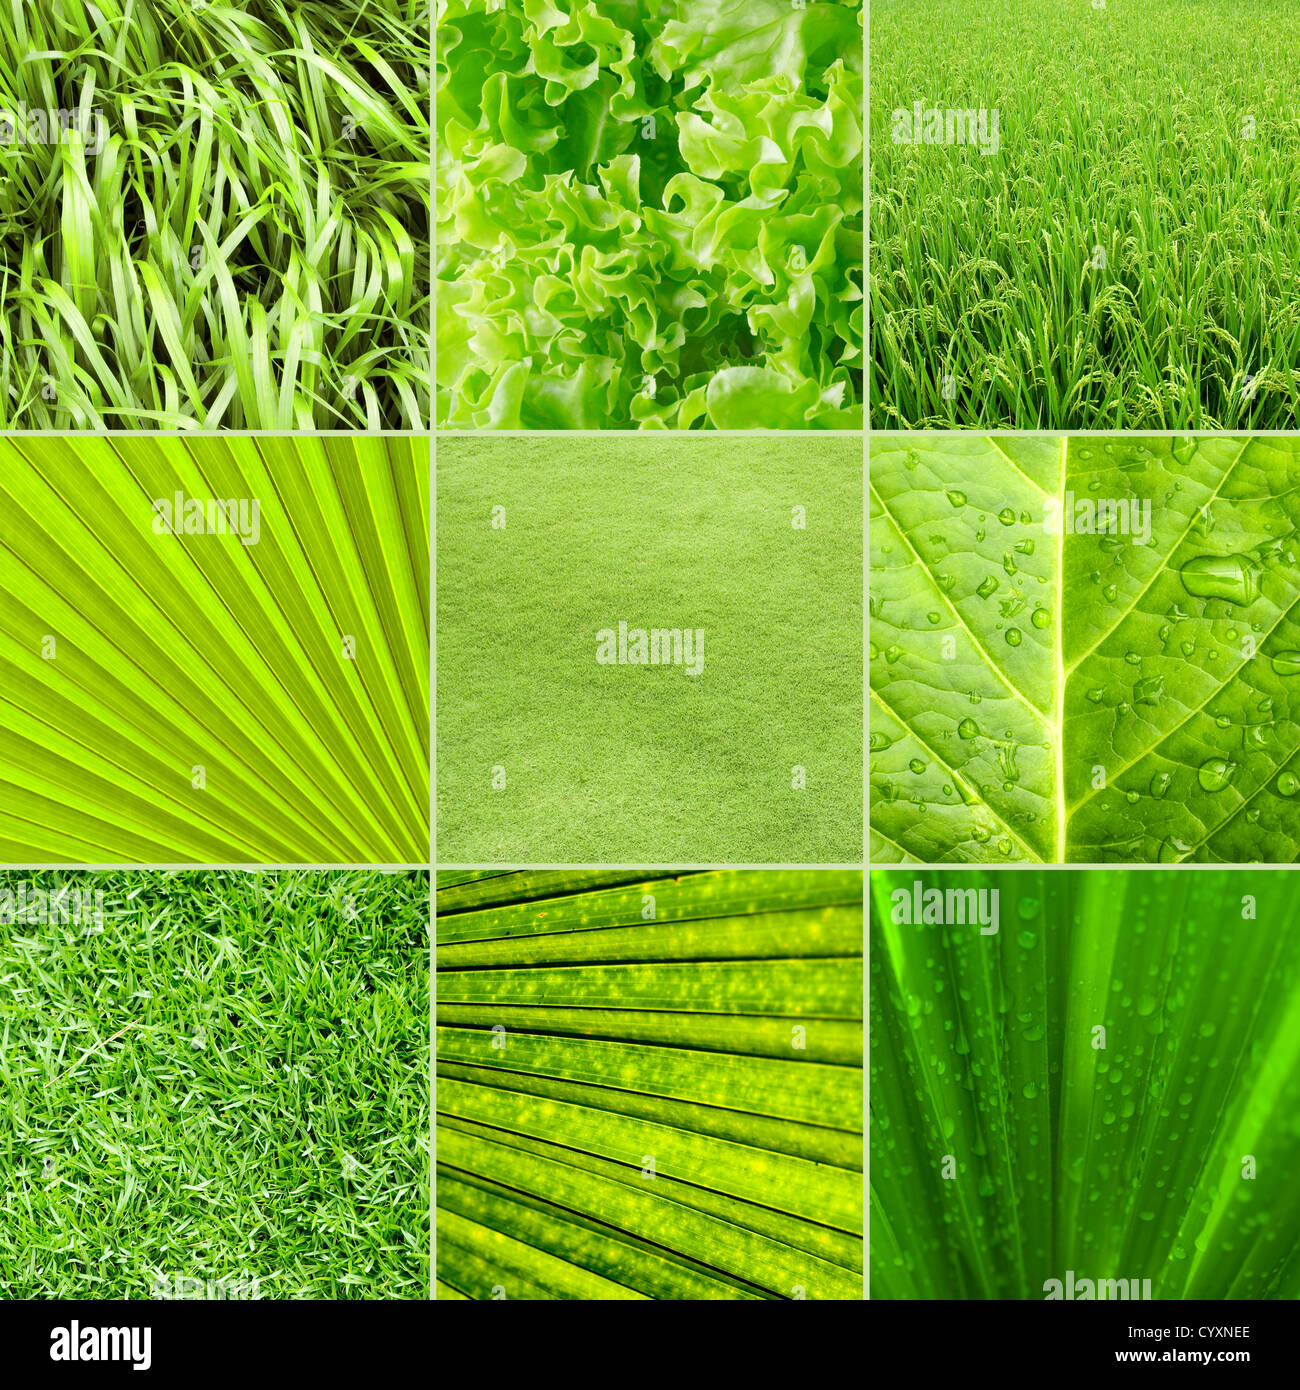 Collage nature green background. All image belongs to me. Stock Photo